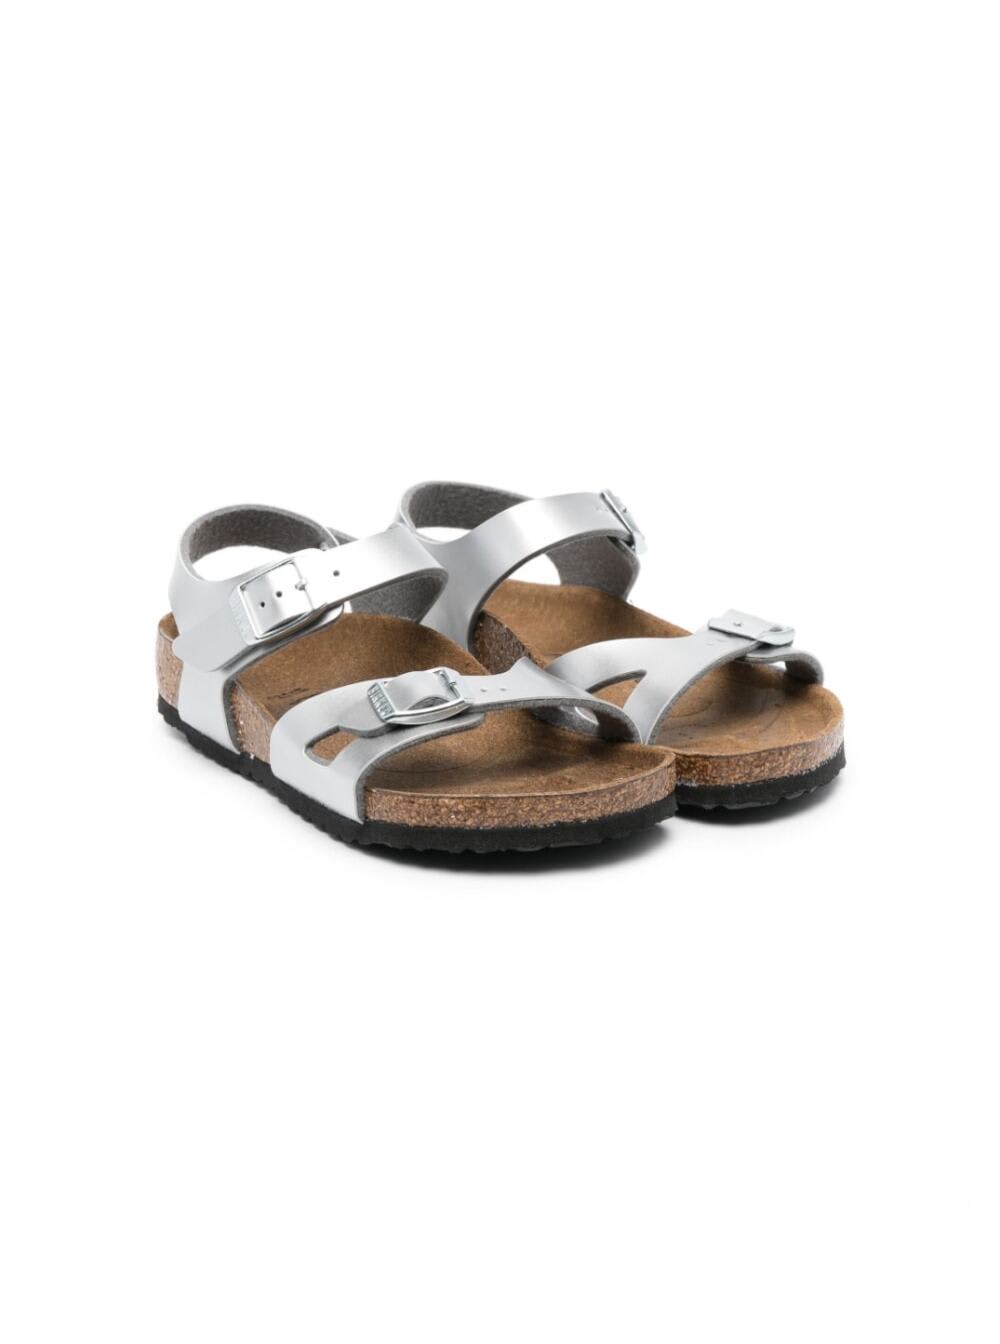 BIRKENSTOCK RIO SILVER-COLORED FLAT SANDALS WITH DOUBLE STRAP IN METALLIC FAUX LEATHER GIRL